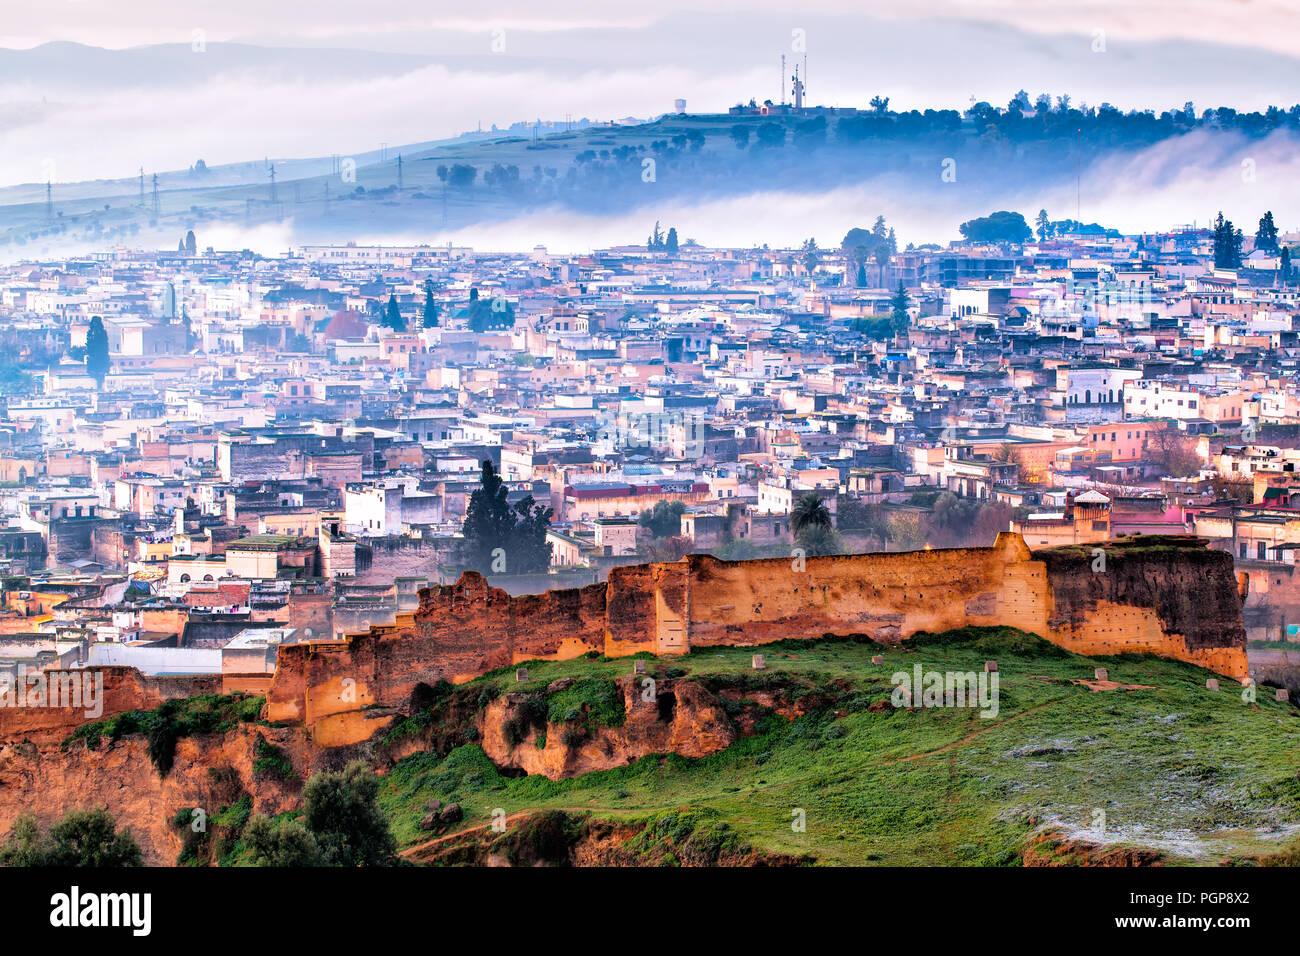 Morocco Fez aerial view over ancient fortified wall. Frosty winter day with fog rolling in. Atmospheric wide shot of this picturesque medieval city. Stock Photo